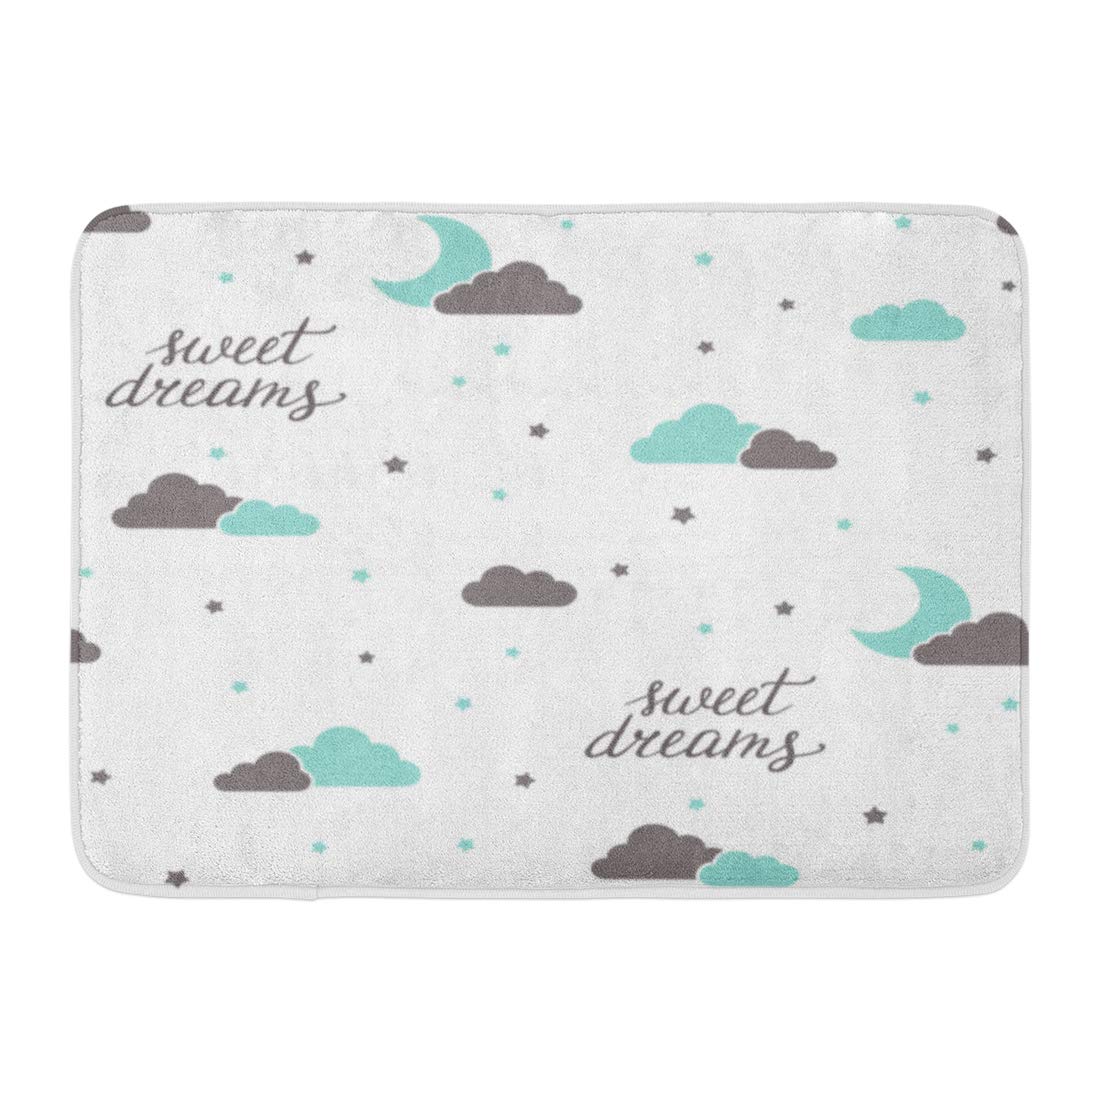 GODPOK Aerial Sleep with Sweet Dreams Hand Lettering Moon Stars and Clouds Kids Baby Rug Doormat Bath Mat 23.6x15.7 inch - image 1 of 1